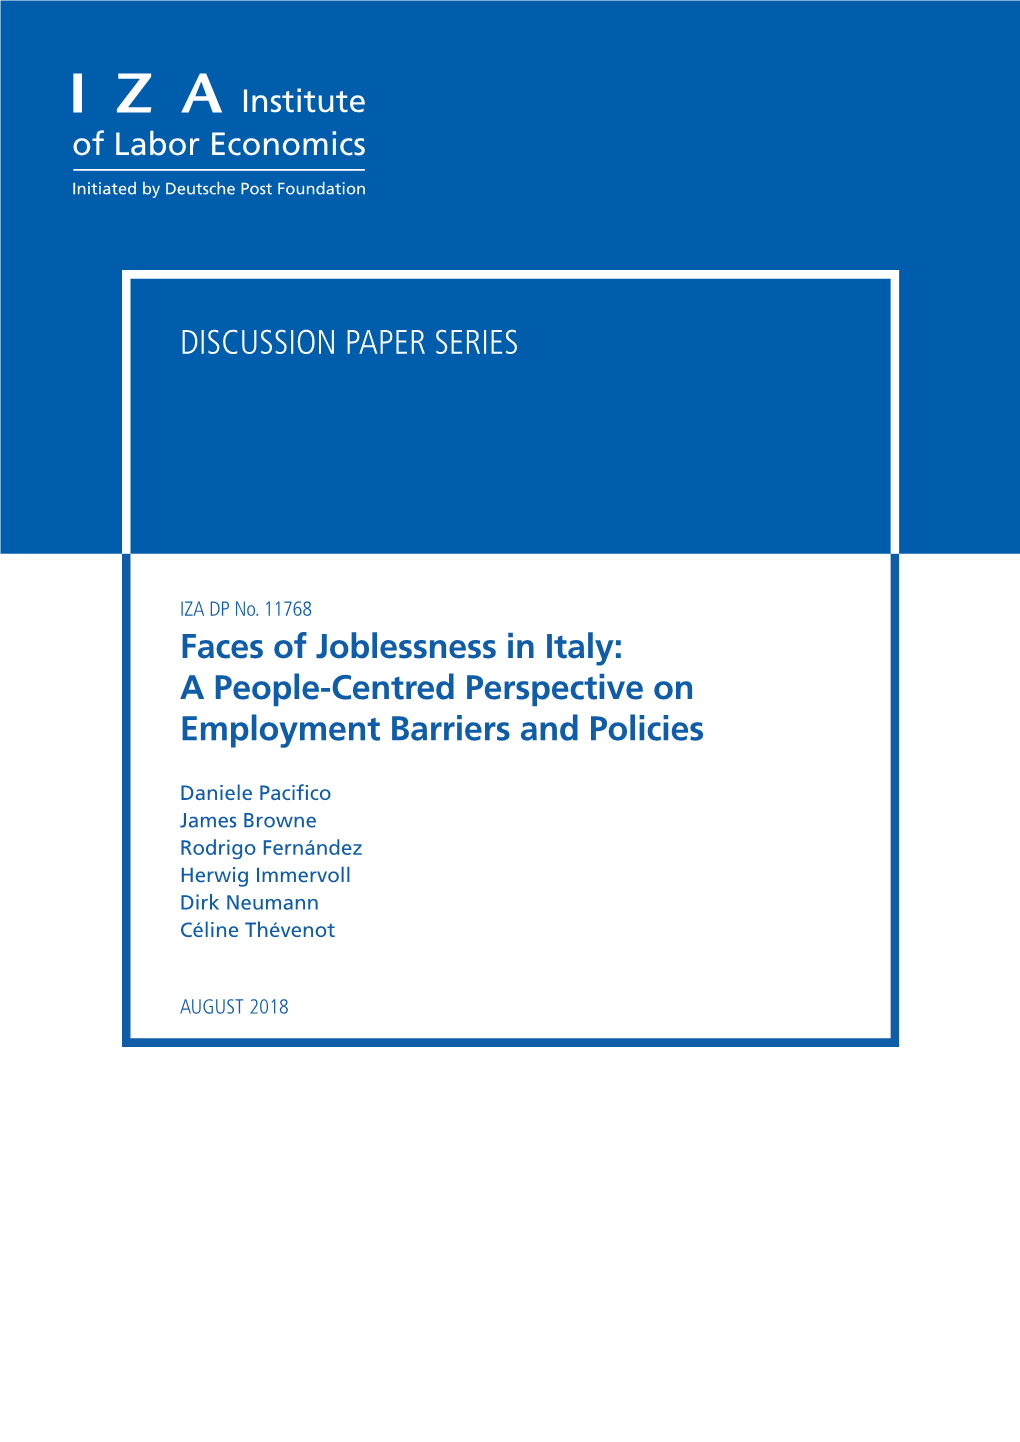 Faces of Joblessness in Italy: a People-Centred Perspective on Employment Barriers and Policies